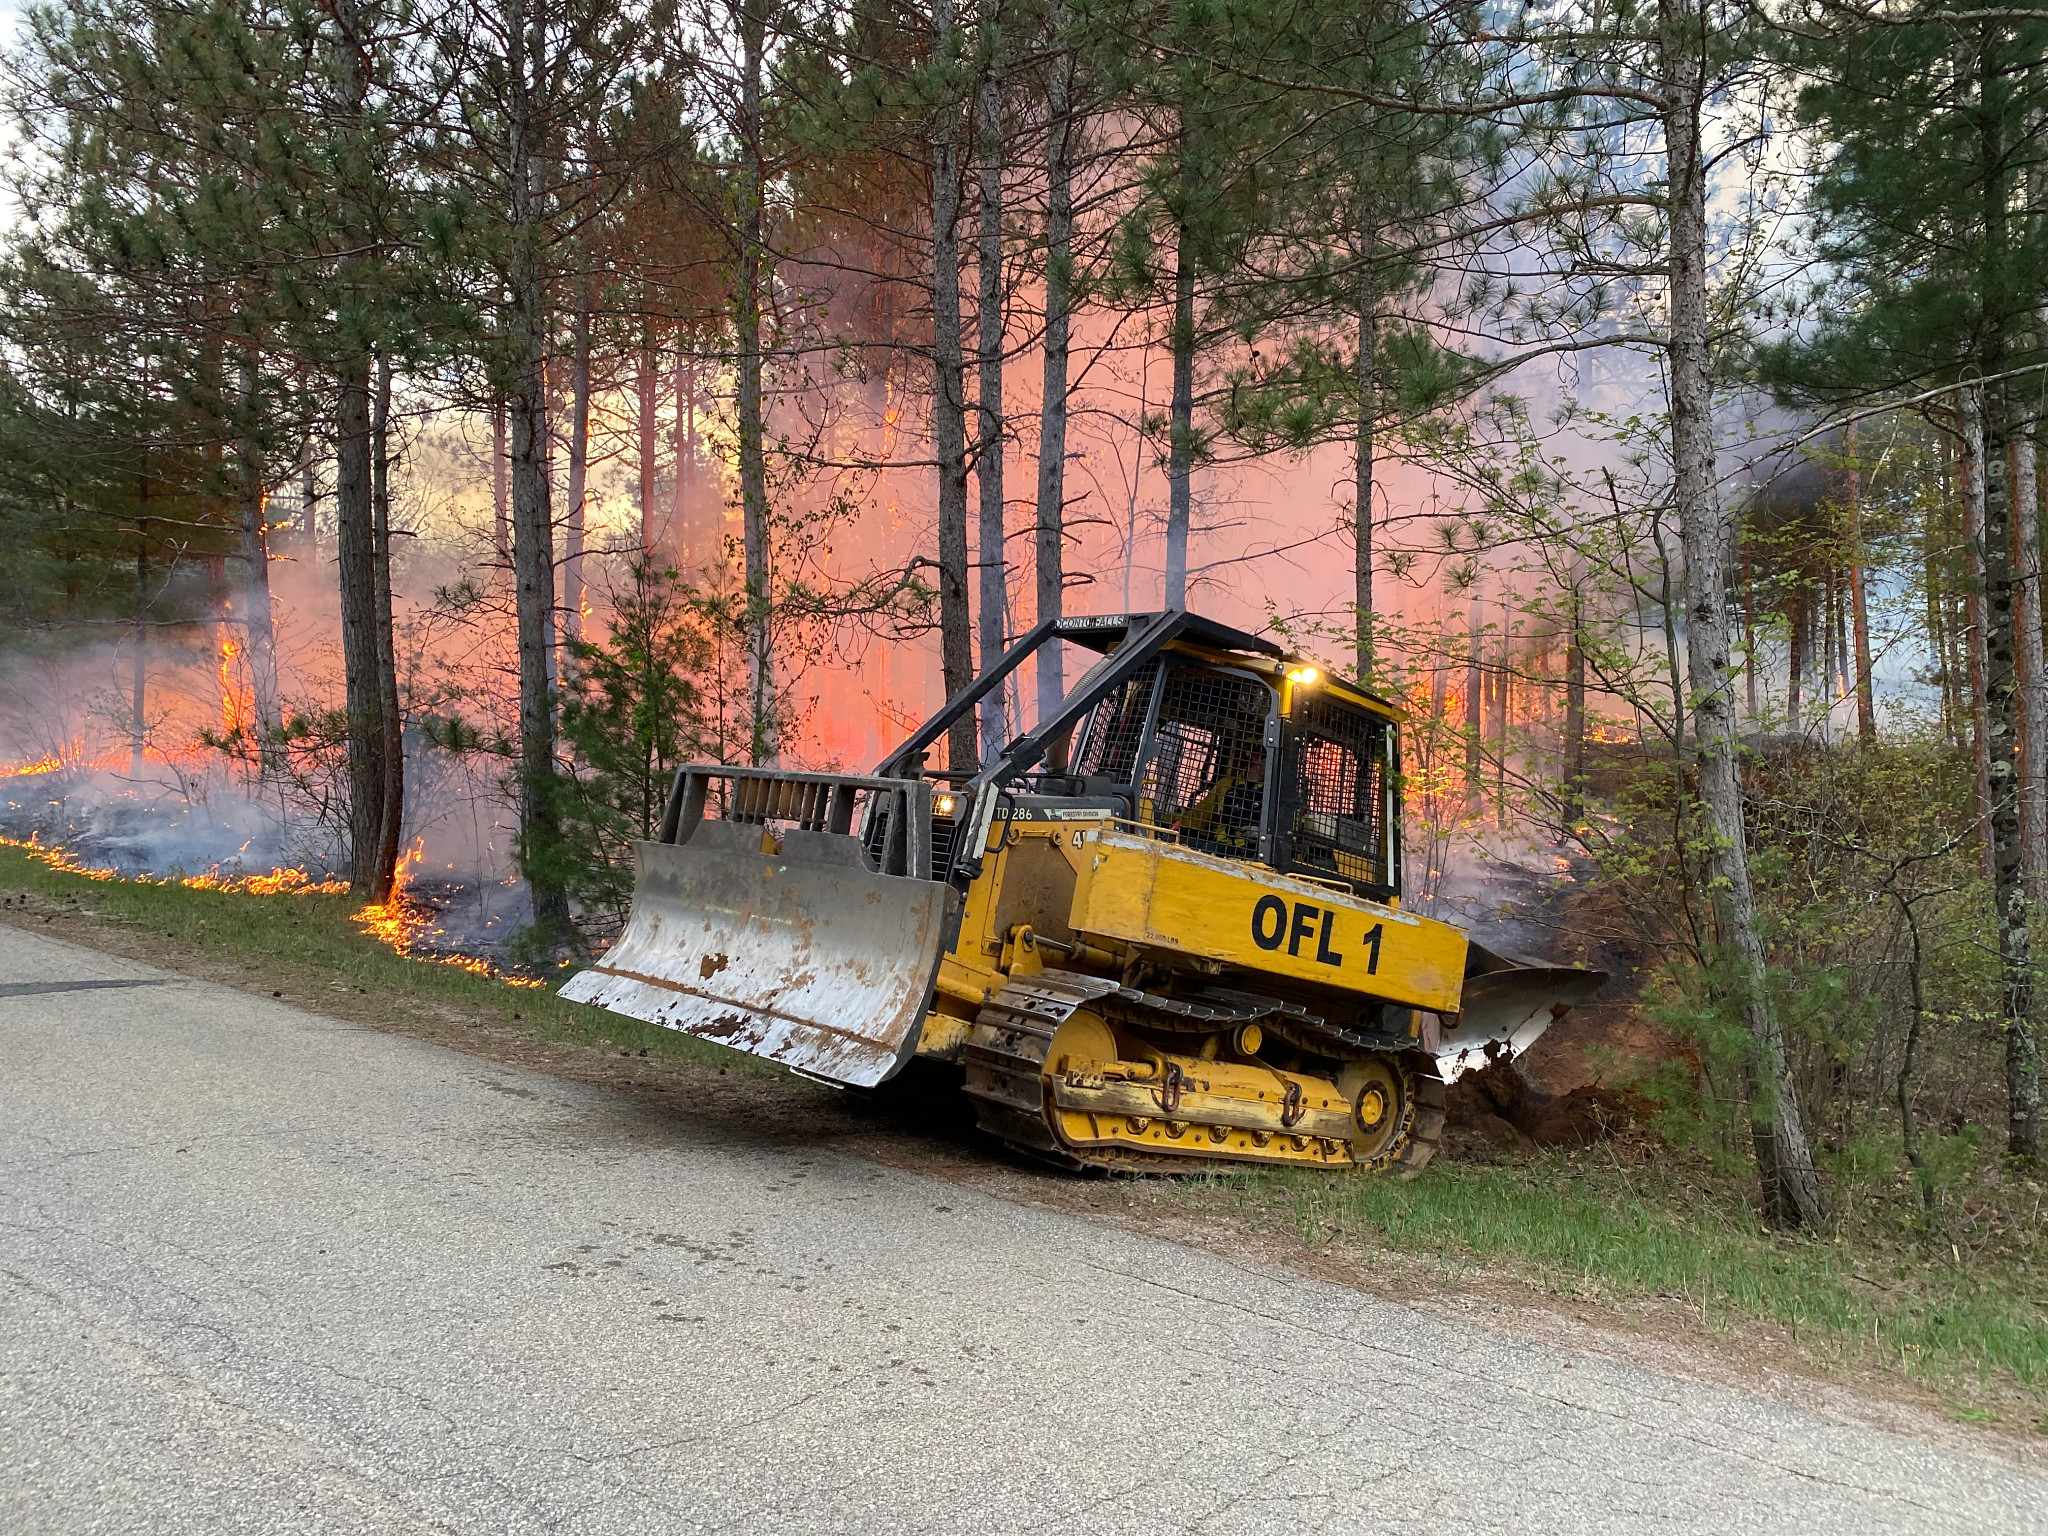 A DNR tractor-plow digs a fireline to contain a fire on May 14 in partnership with Menominee Tribal Enterprises. Please avoid burning due to very high fire danger. 